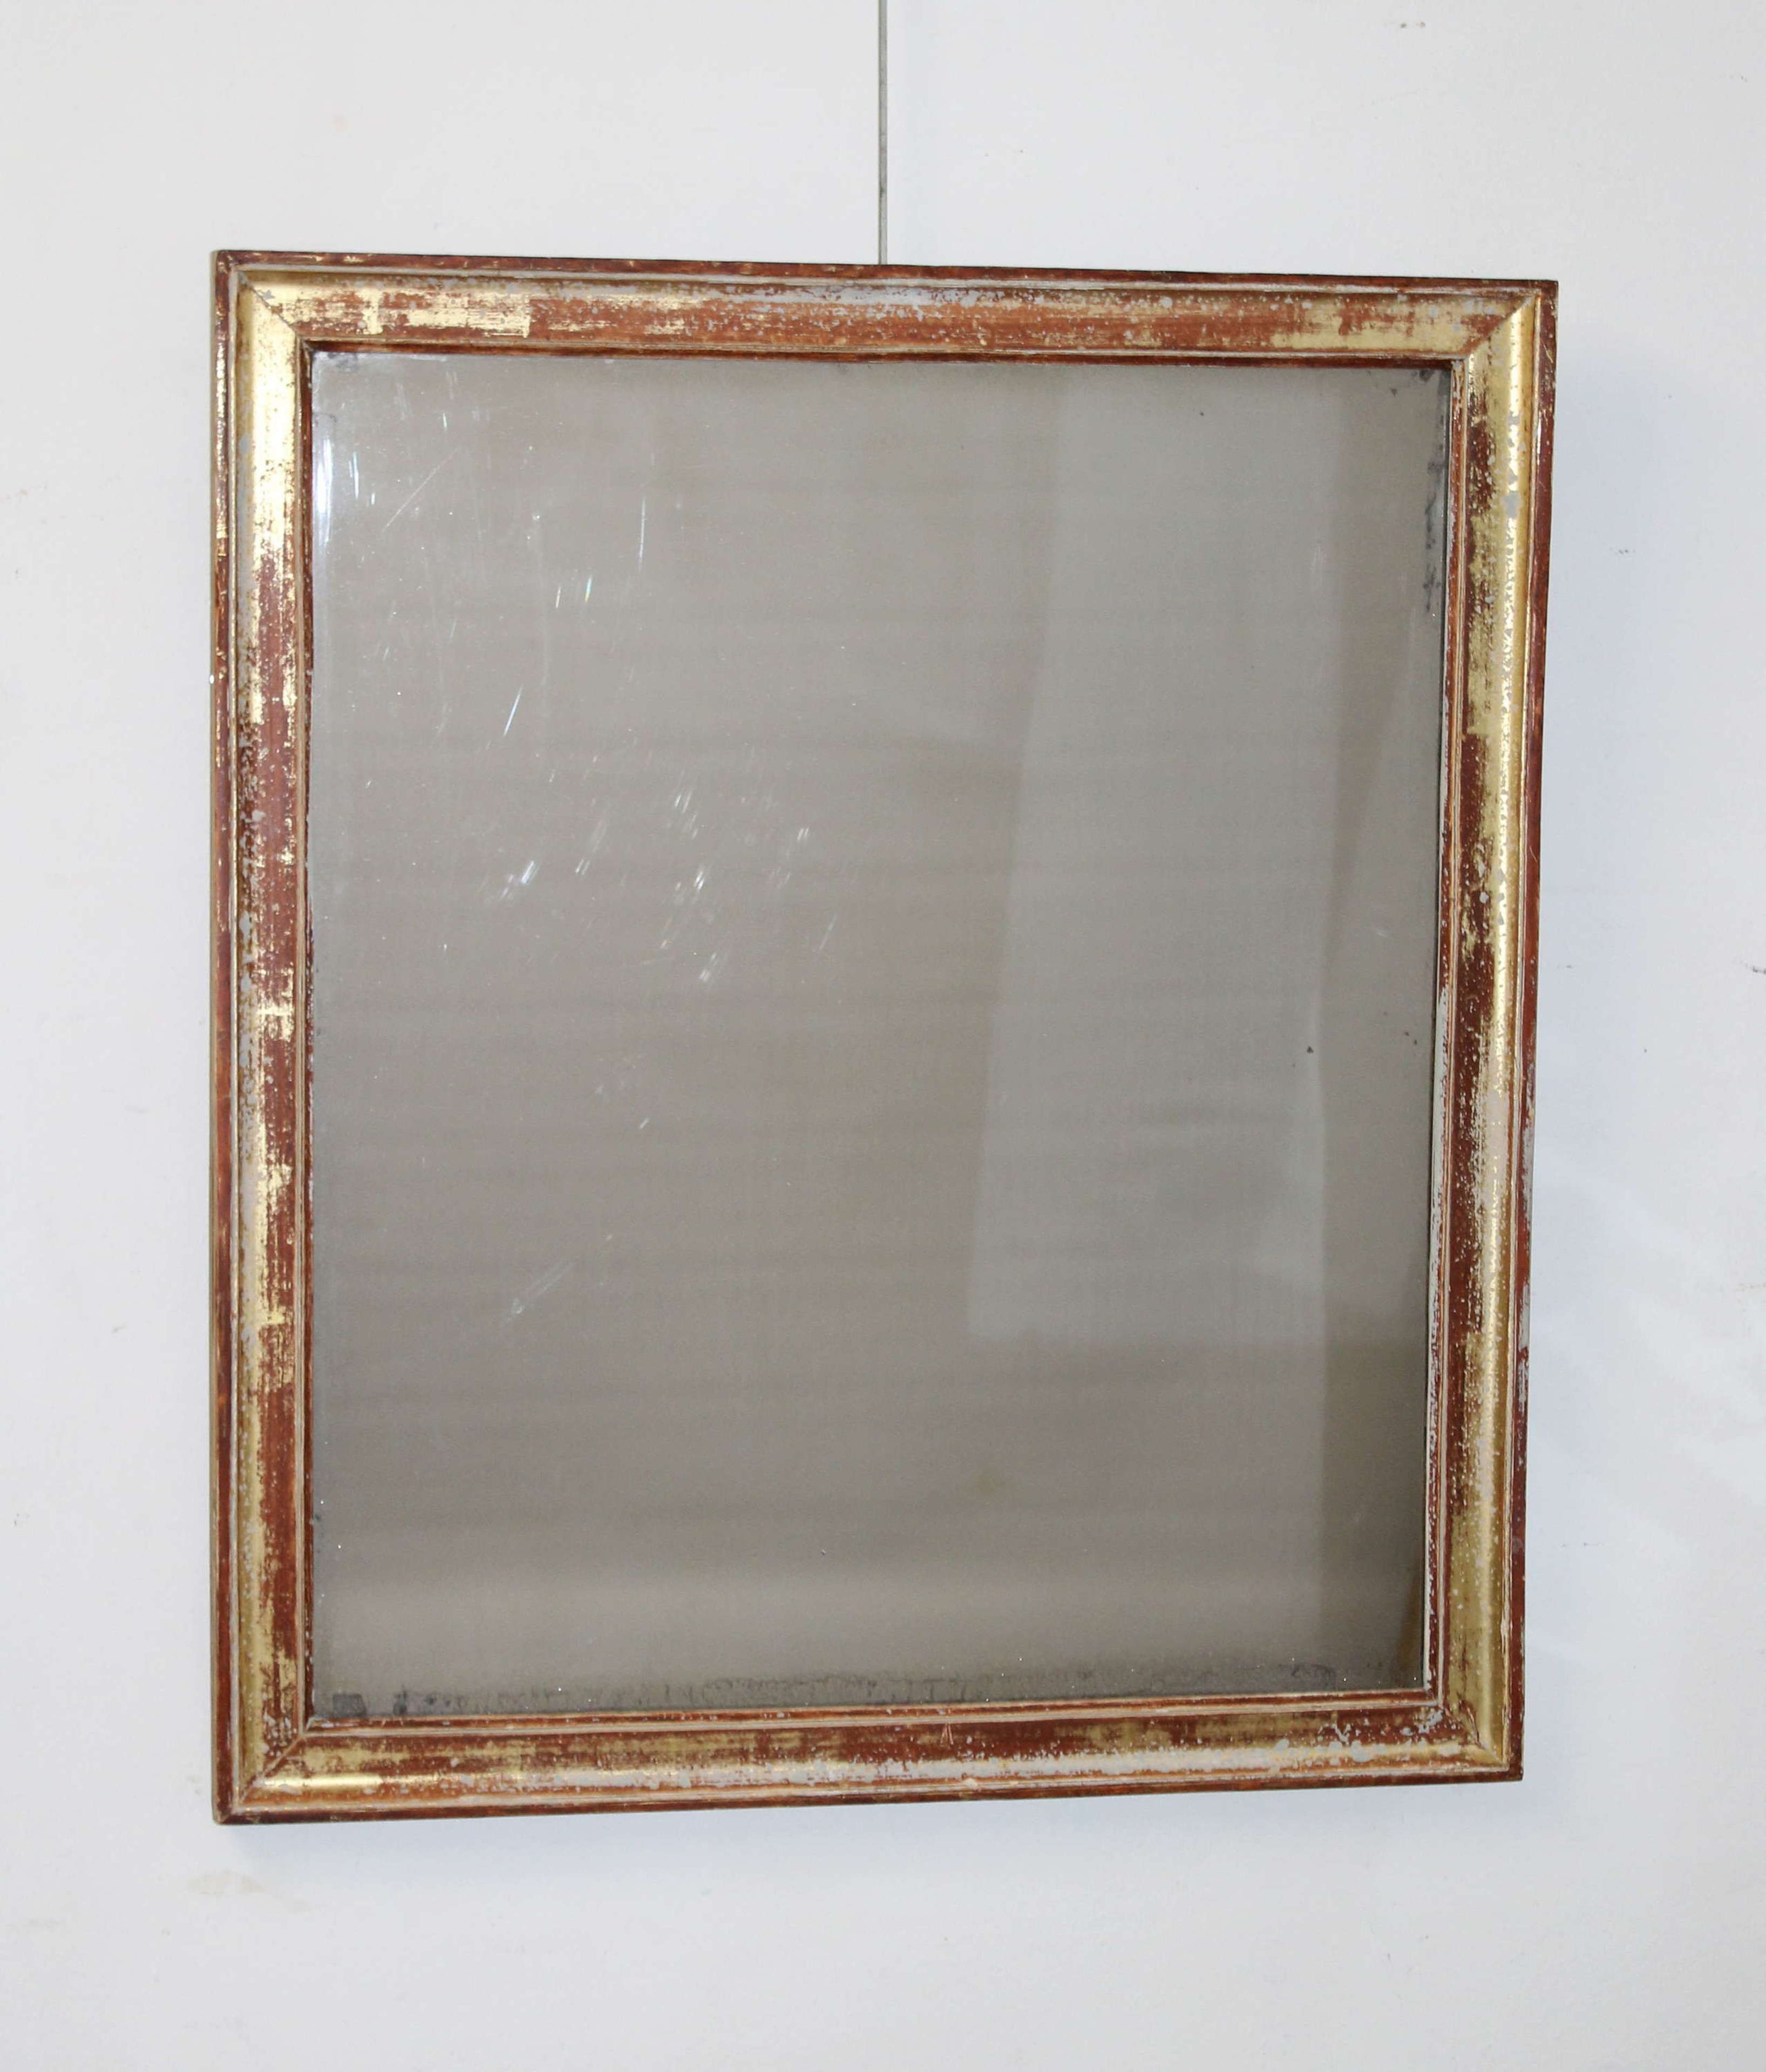 Antique mirror with gold, terracotta and cream frame